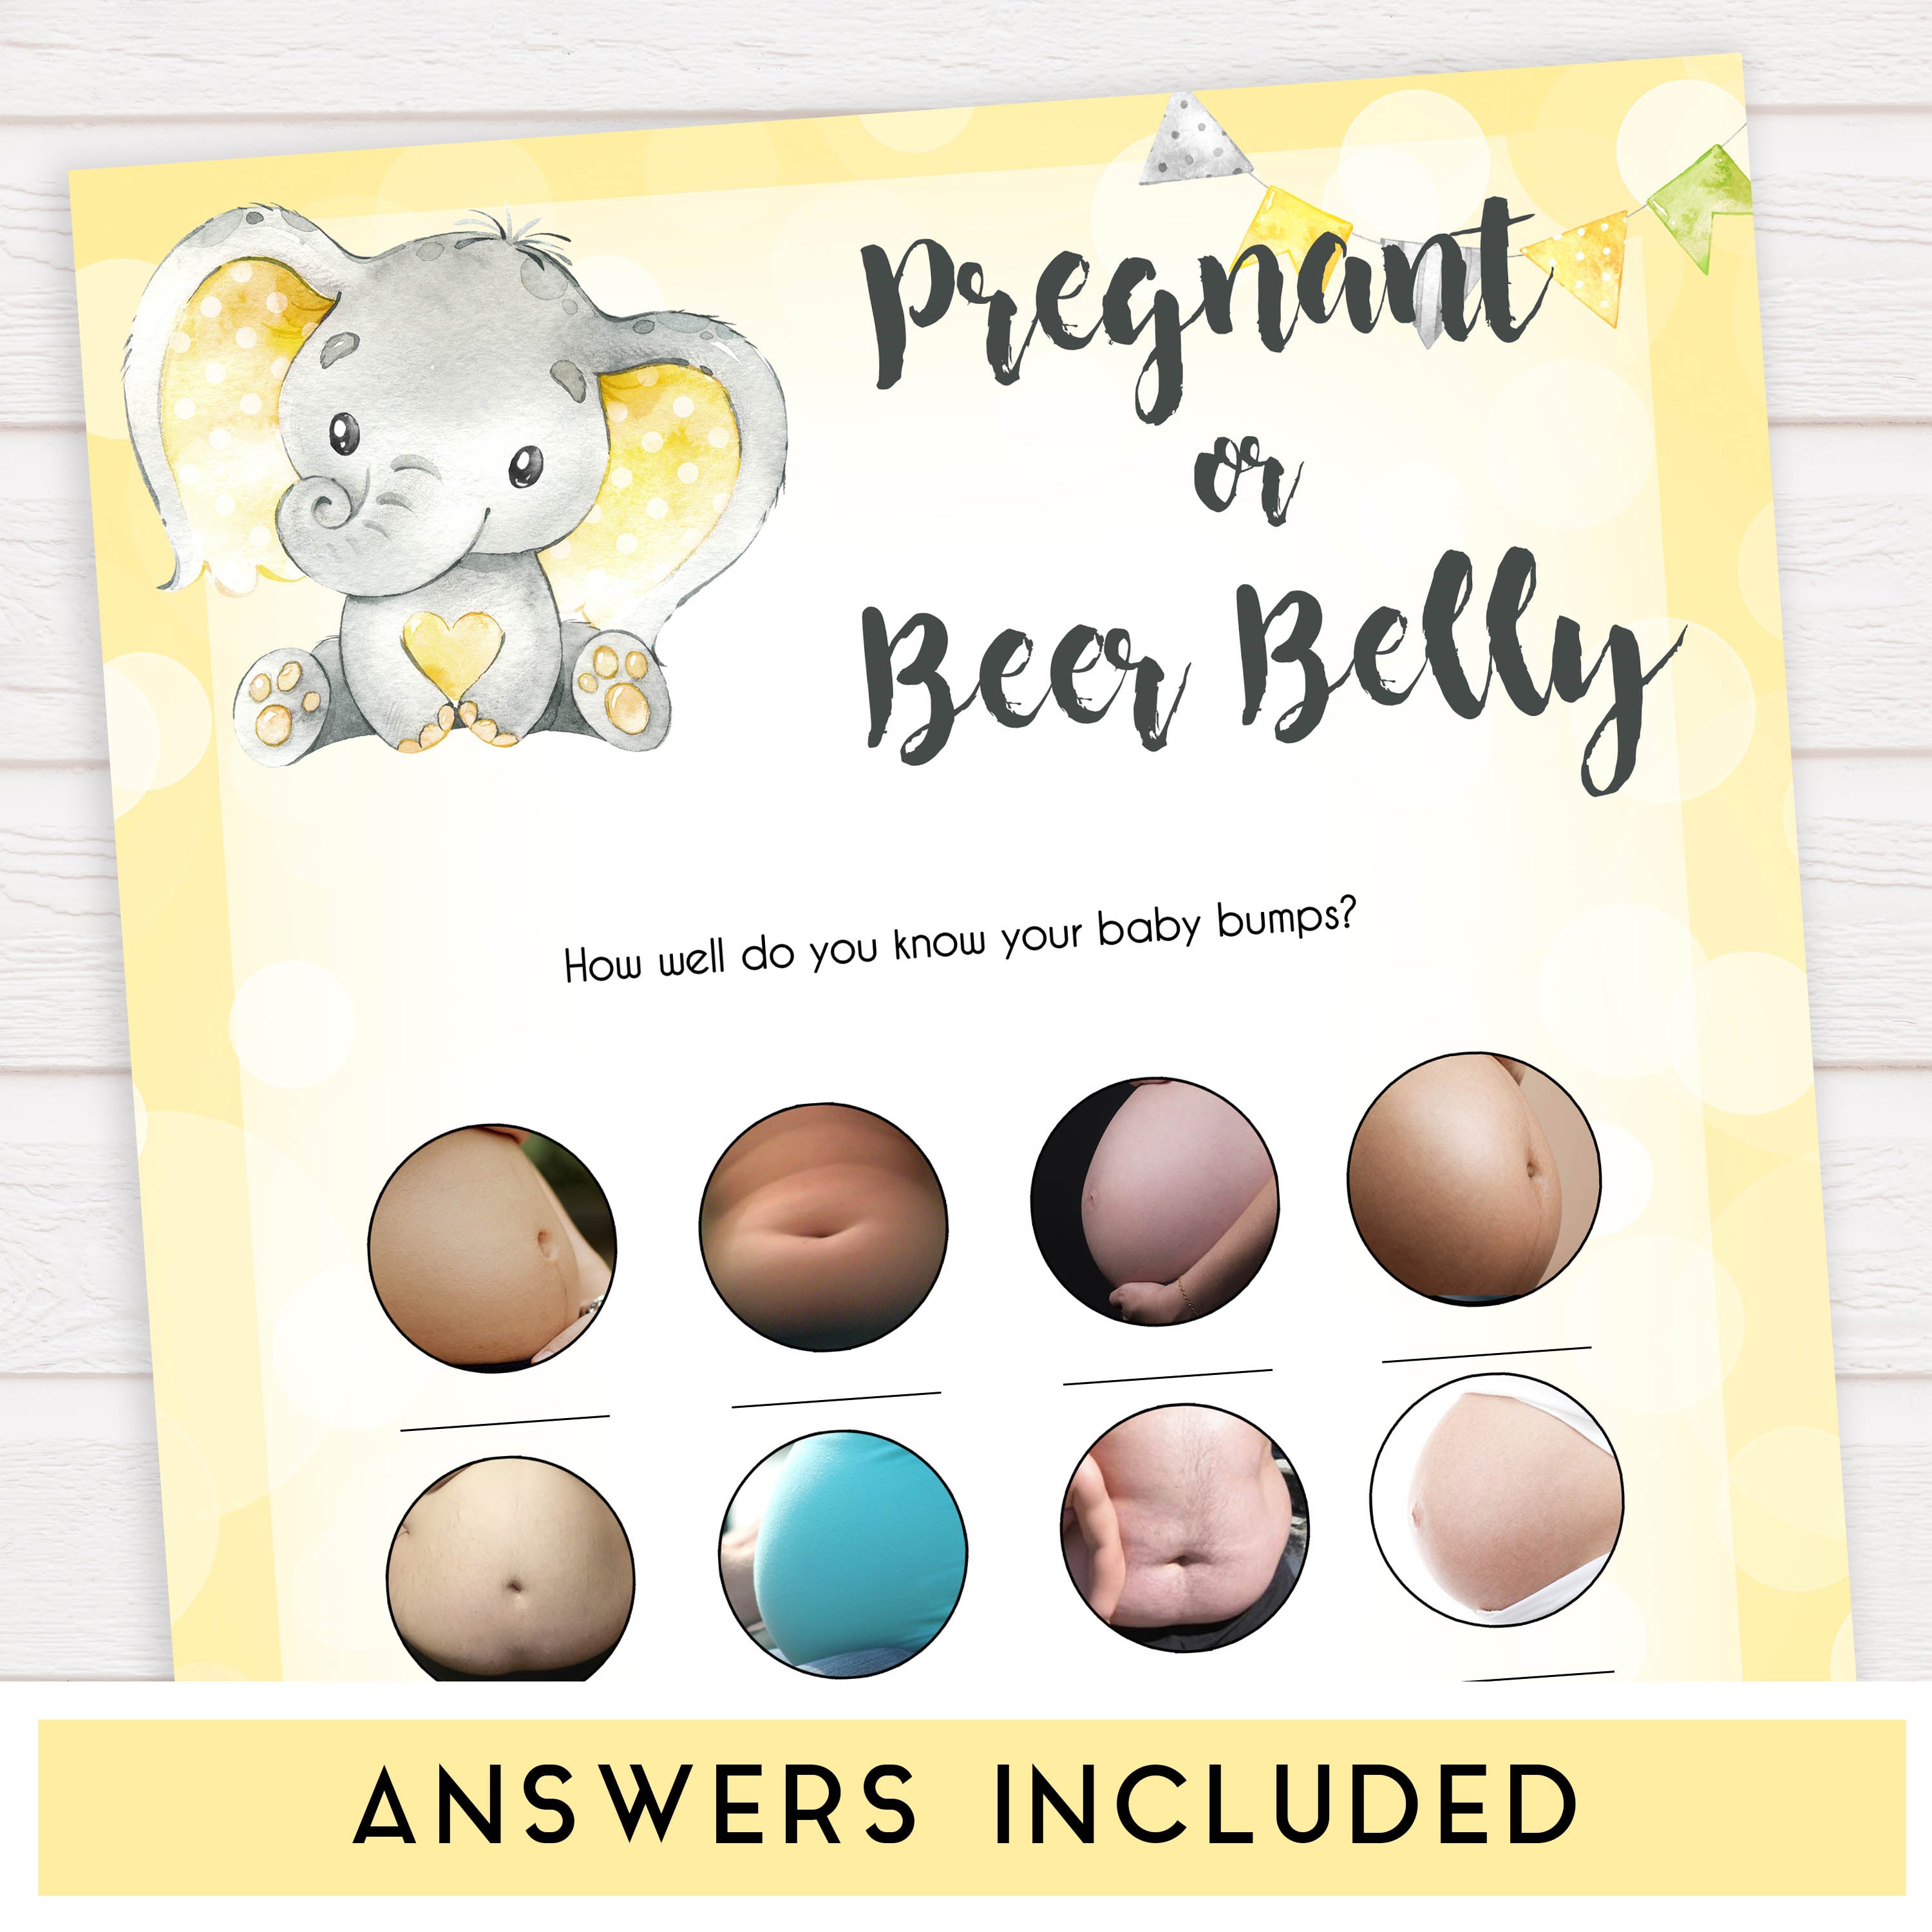 yellow elephant baby games, pregnant or beer belly baby games, yellow baby games, elephant baby shower, fun baby games, top 10 baby games, popular baby games, printable baby games